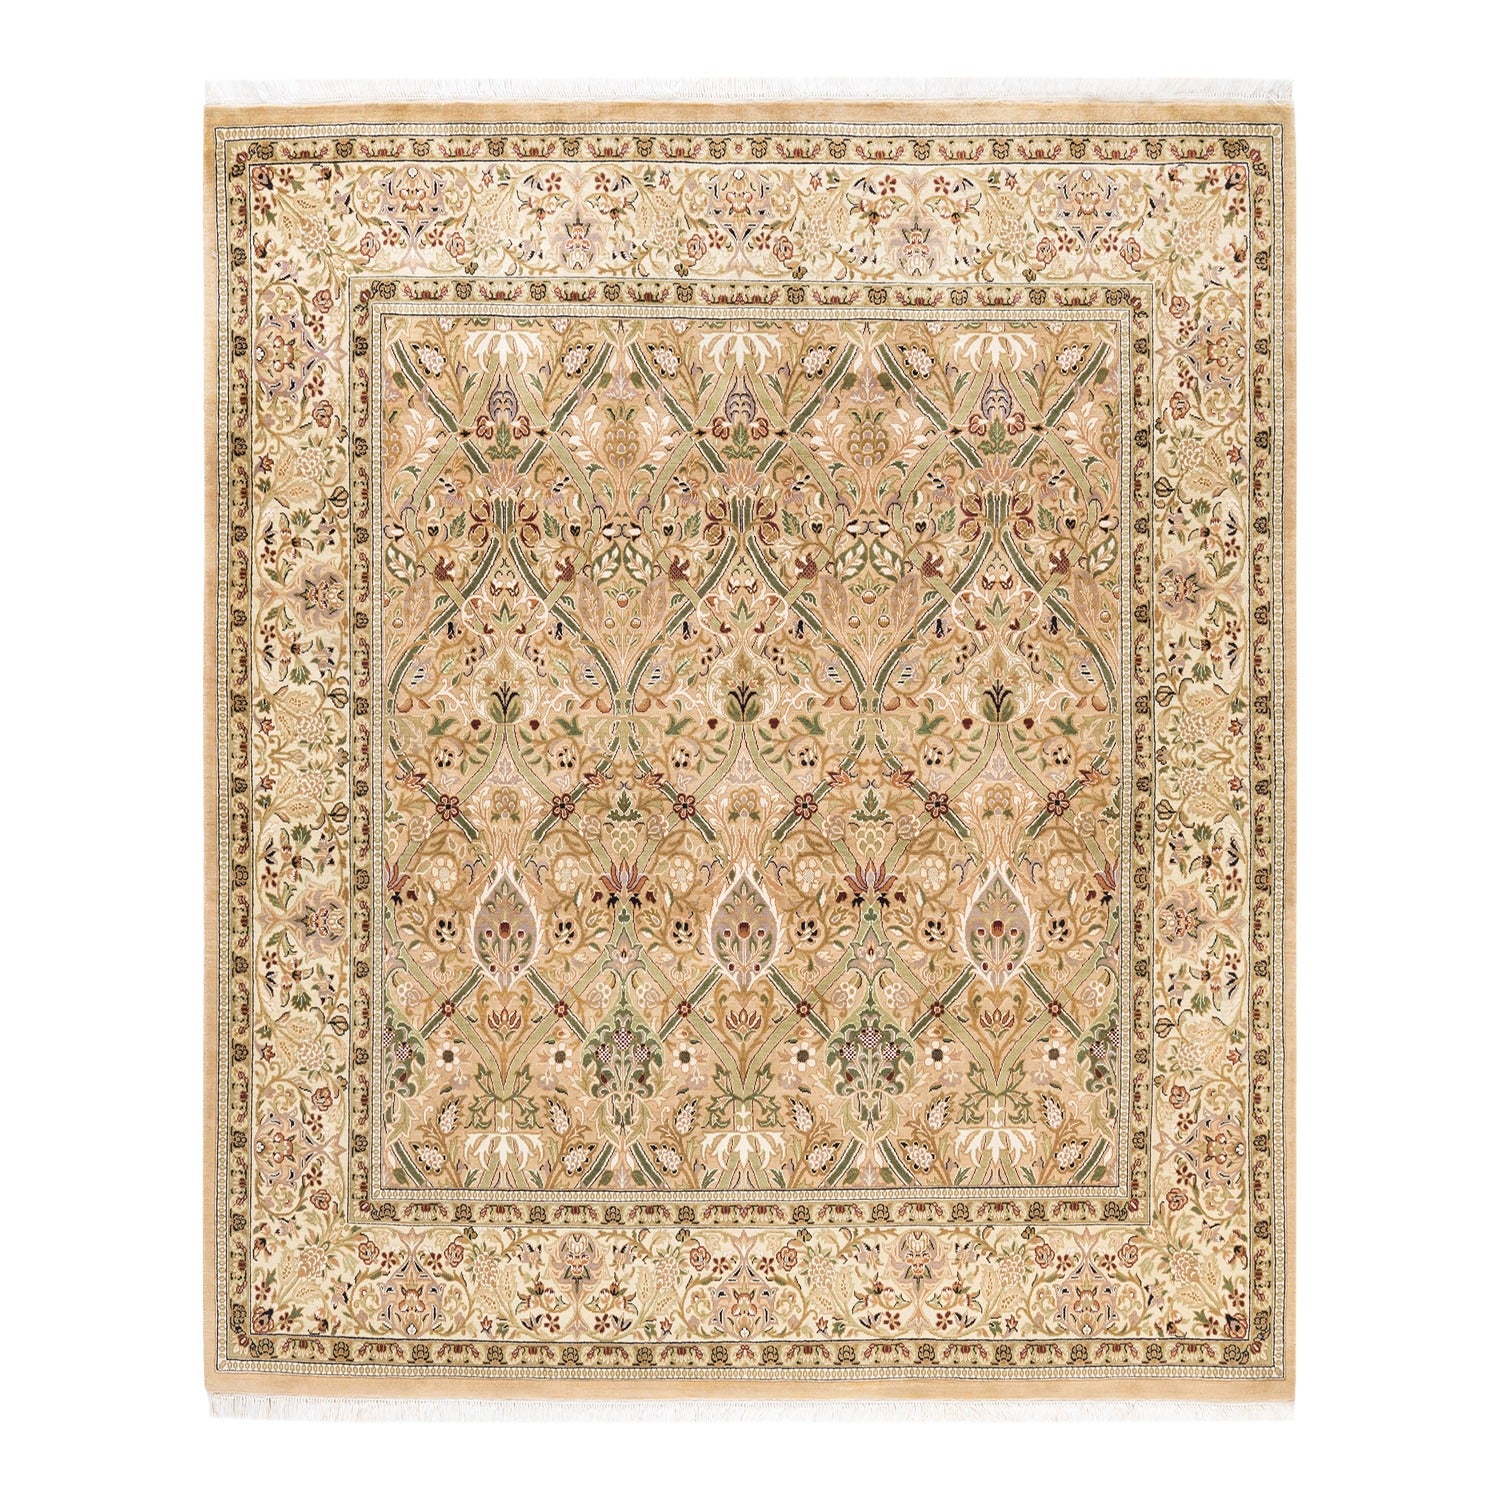 Intricate and ornate rug featuring symmetrical floral patterns in beige, green, and pink with a diamond-like lattice pattern and elaborate border.